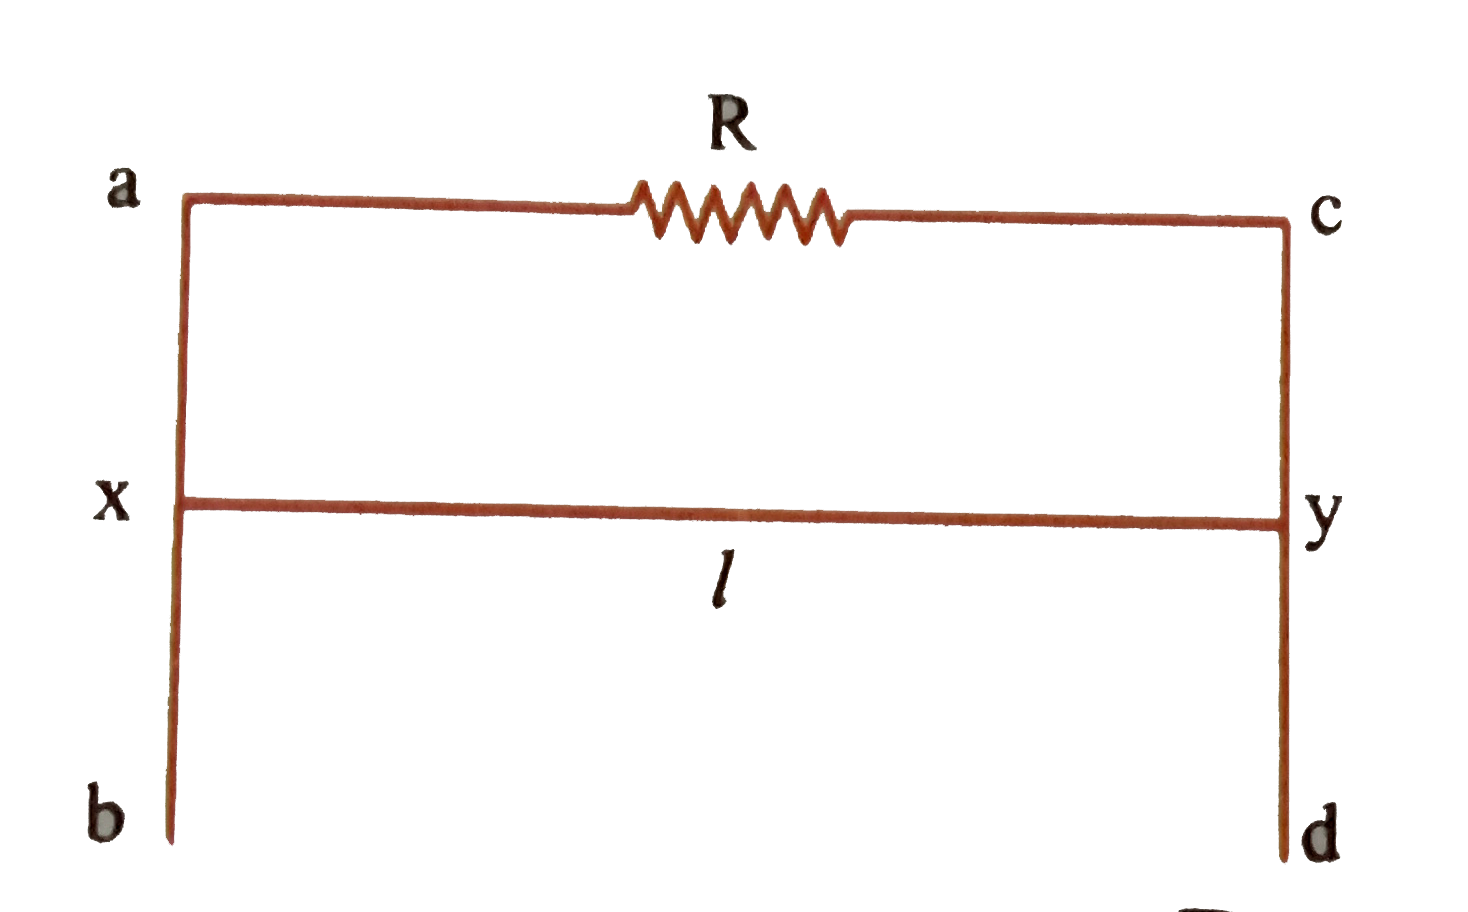 A conducting wire xy of lentgh l and mass m is sliding without friction on vertical conduction rails ab and cd as shown in figure. A uniform magnetic field B exists perpendicular to the plane of the rails, x moves with a constant velocity of